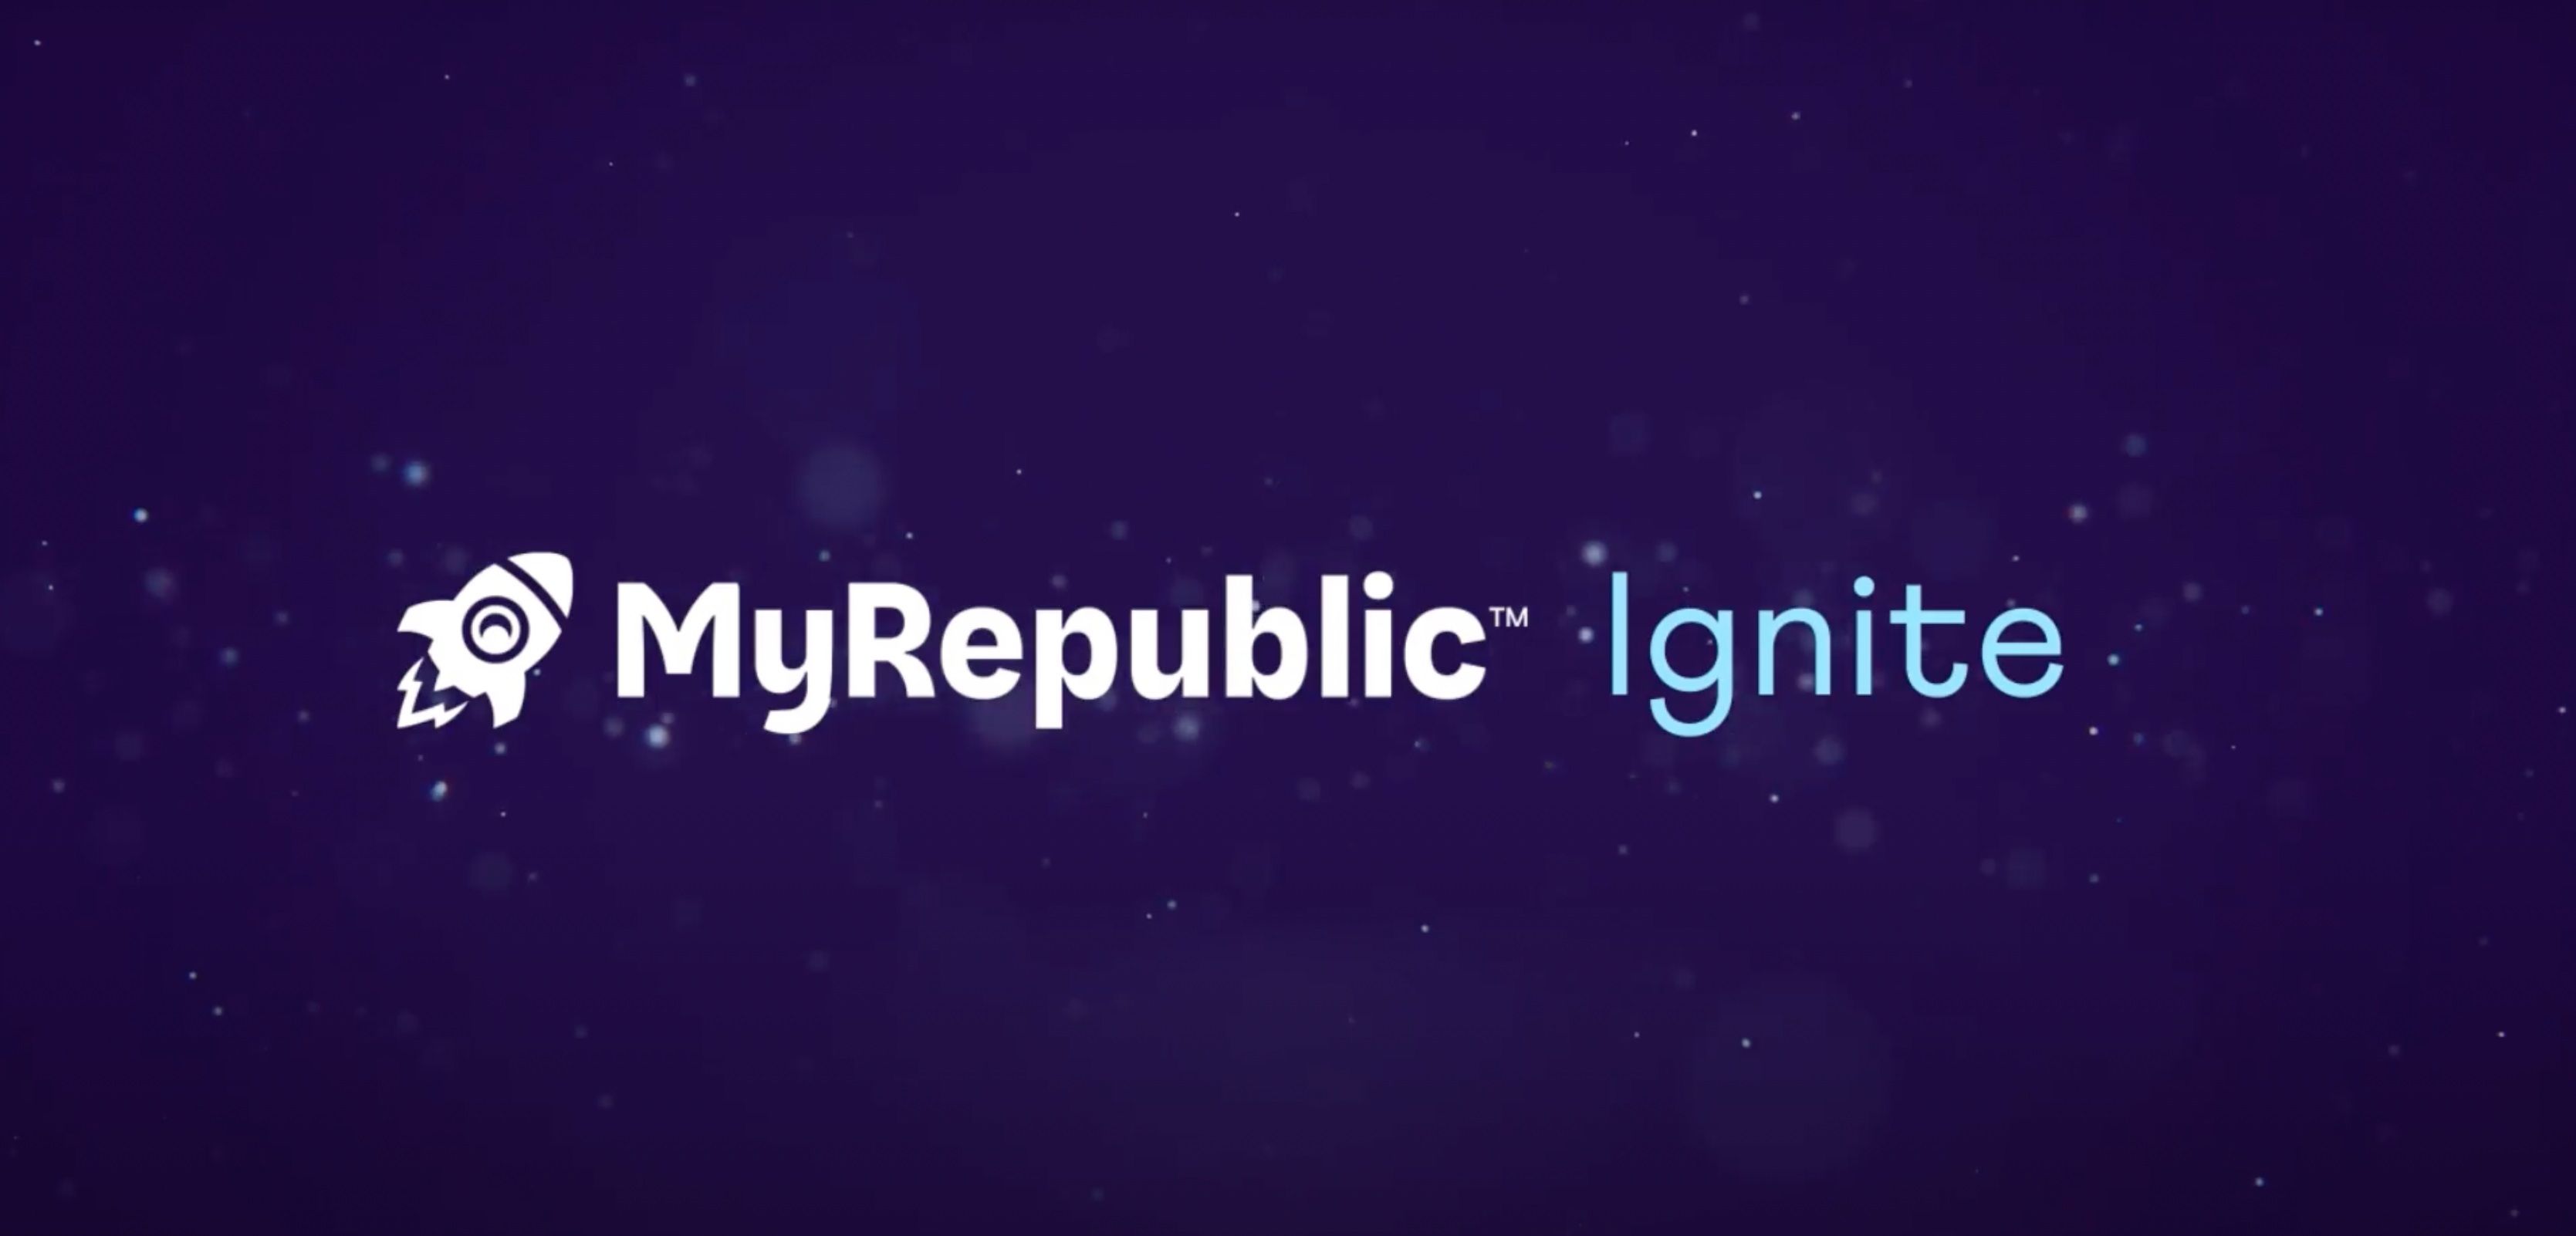 MyRepublic launches Ignite to provide more ICT solutions for local SMEs